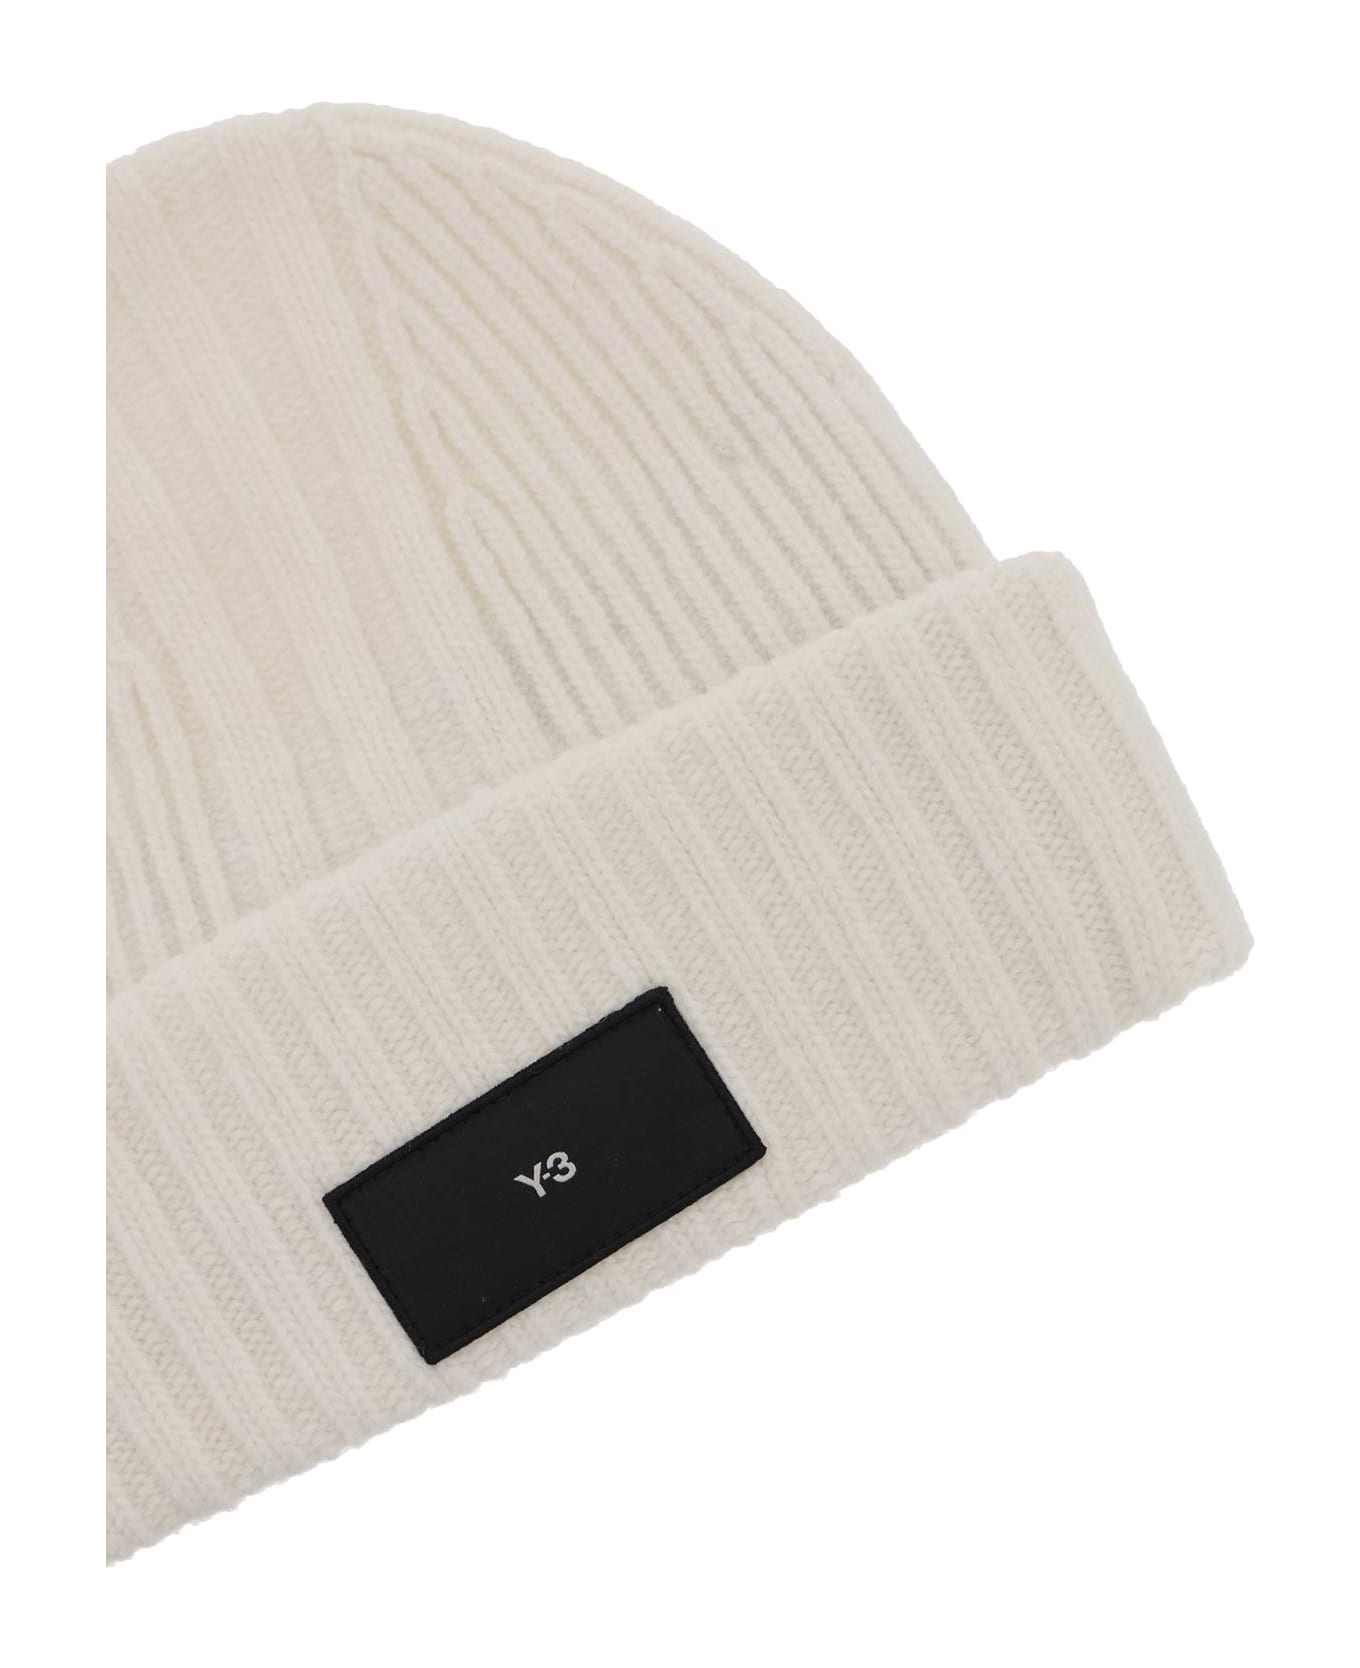 Y-3 Beanie Hat In Ribbed Wool With Logo Patch - TALC (White) コート